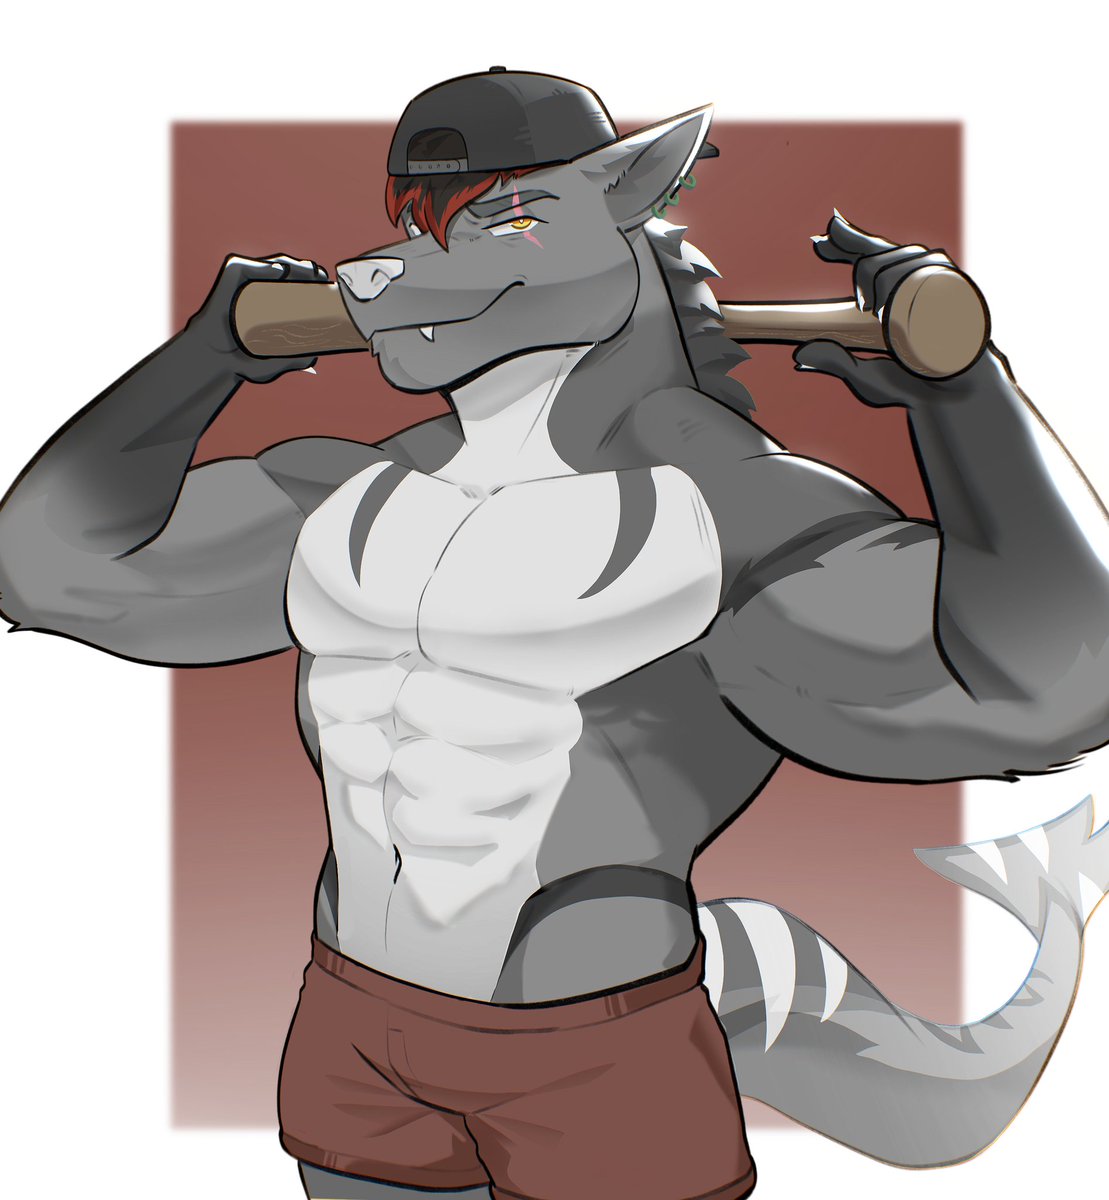 University theme at FWA? This jock will come prepared. Batter up that ass nerd for I'm about to score a home run with you. 

🎨 by @kattoloaf